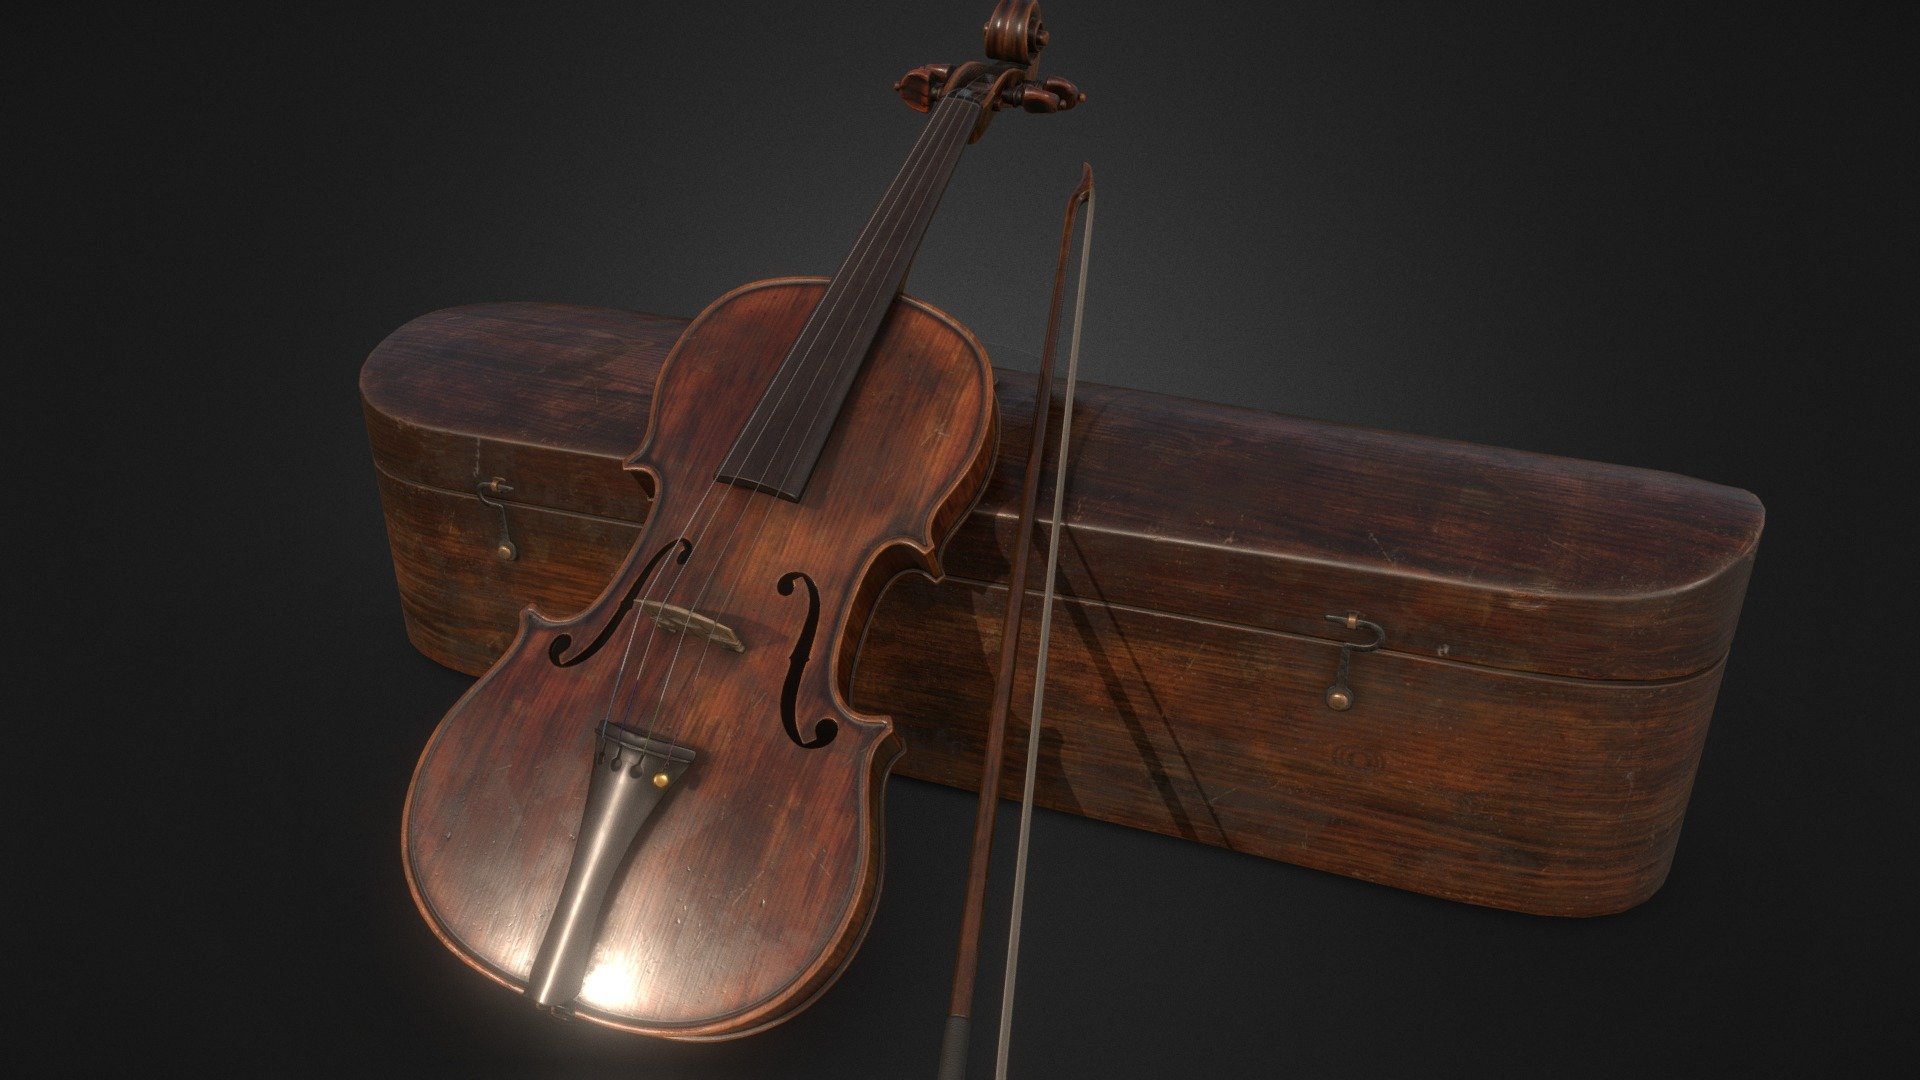 Violin low poly model

4k textures. Total polycount 20053 tris.

Model created on Blender and ZBrush. Textured with Substance Painter 3d model